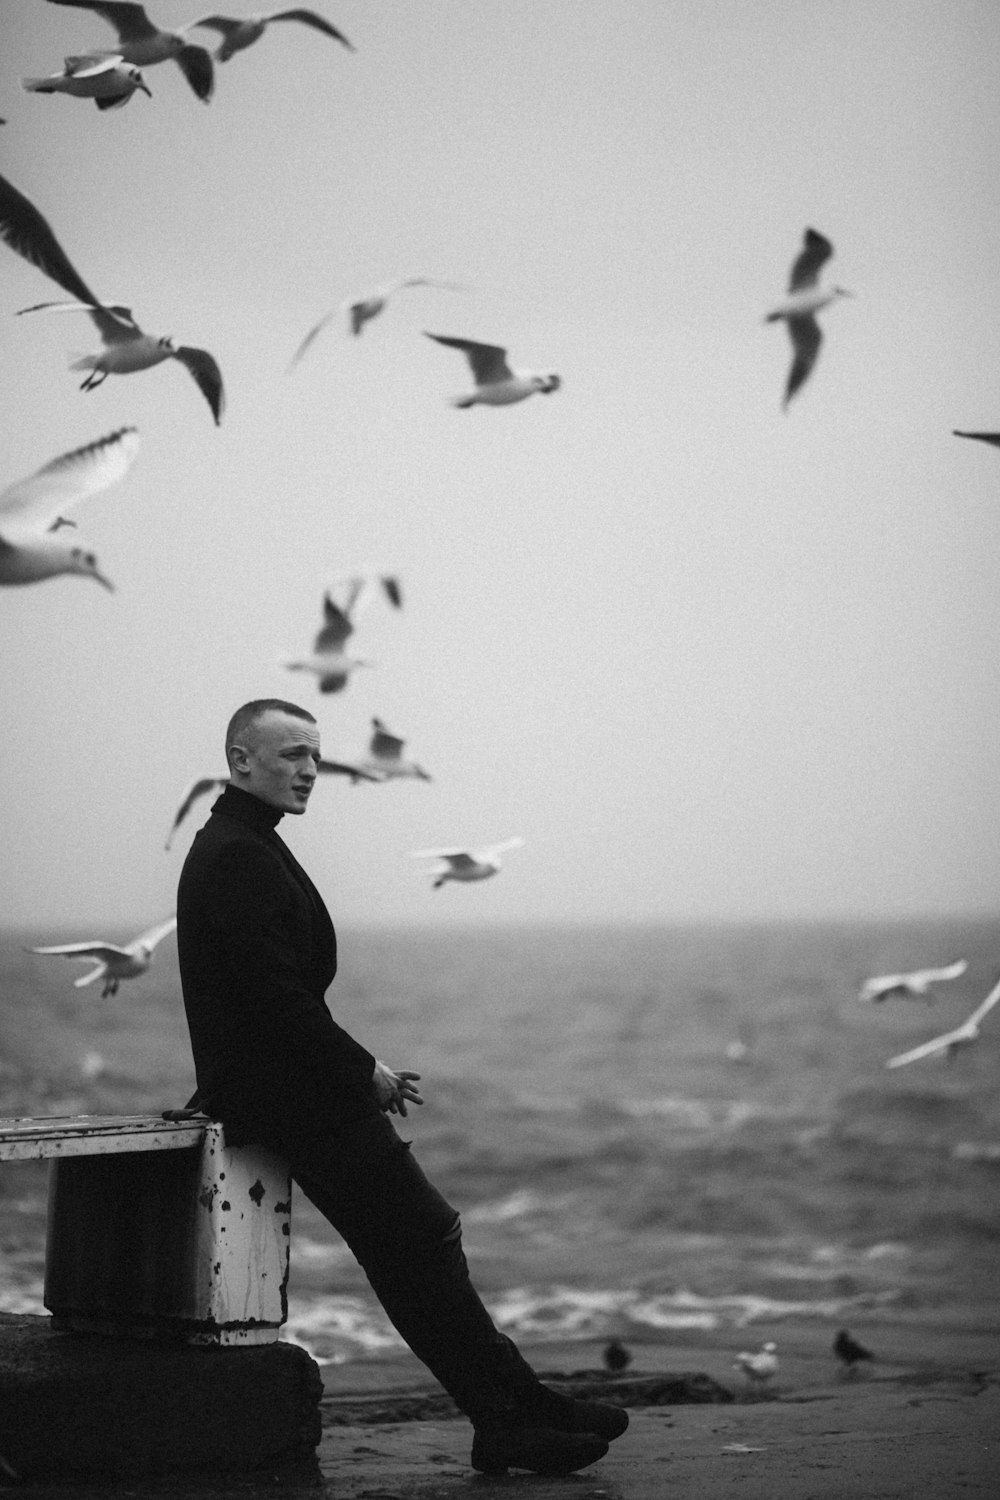 man in black long sleeve shirt standing near birds in grayscale photography